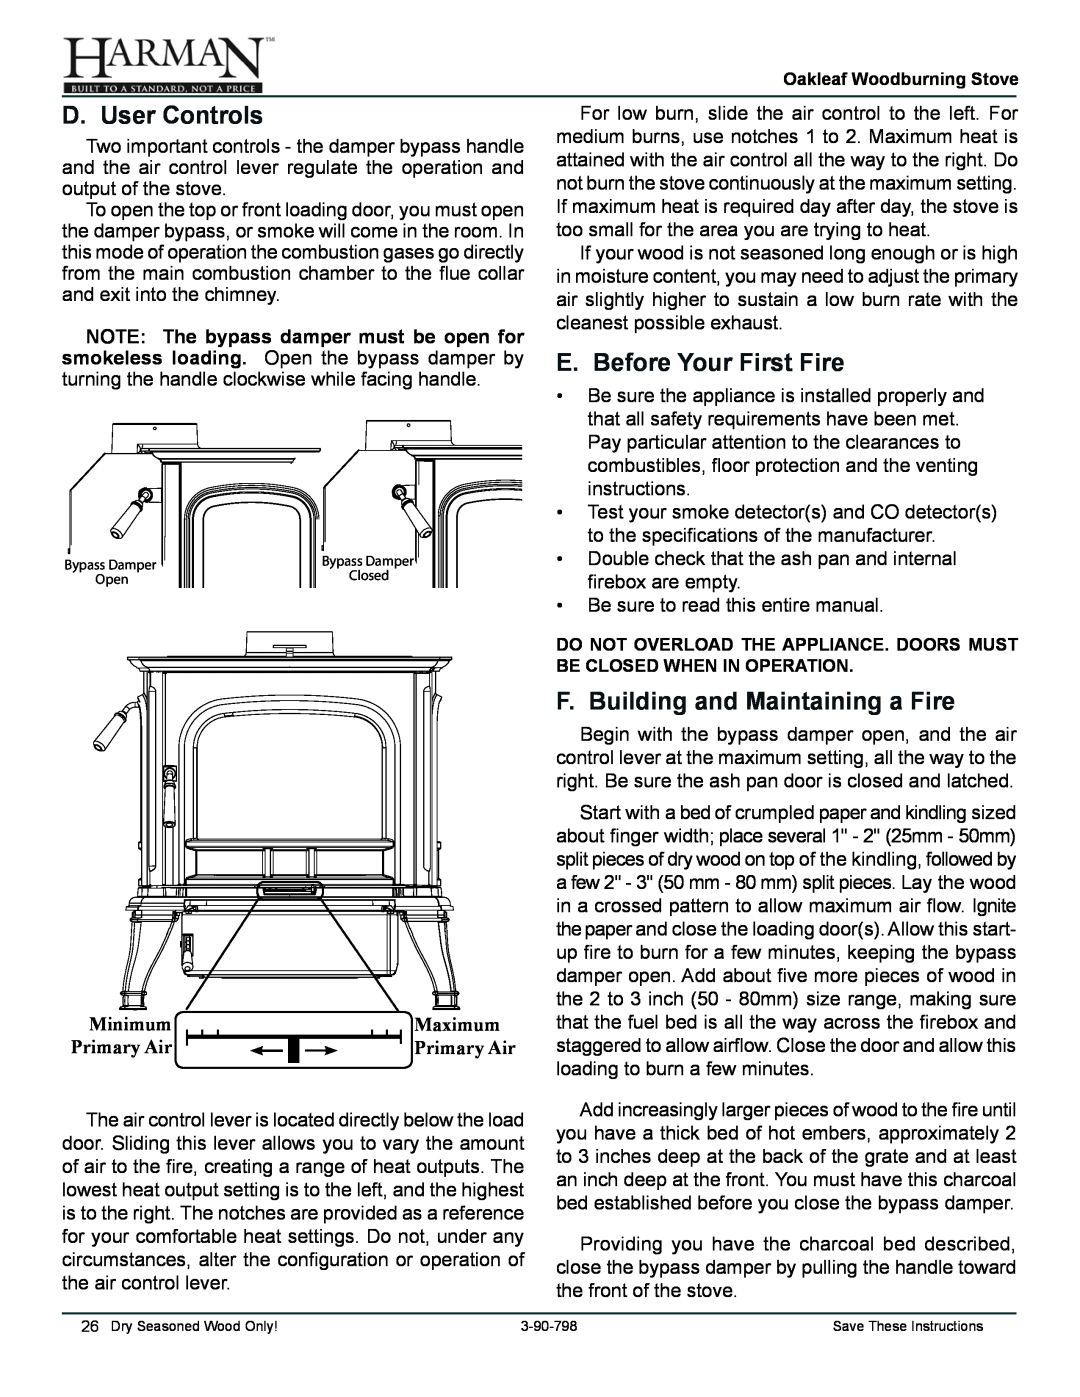 Harman Stove Company 1-90-79700 D. User Controls, E. Before Your First Fire, F. Building and Maintaining a Fire, Minimum 